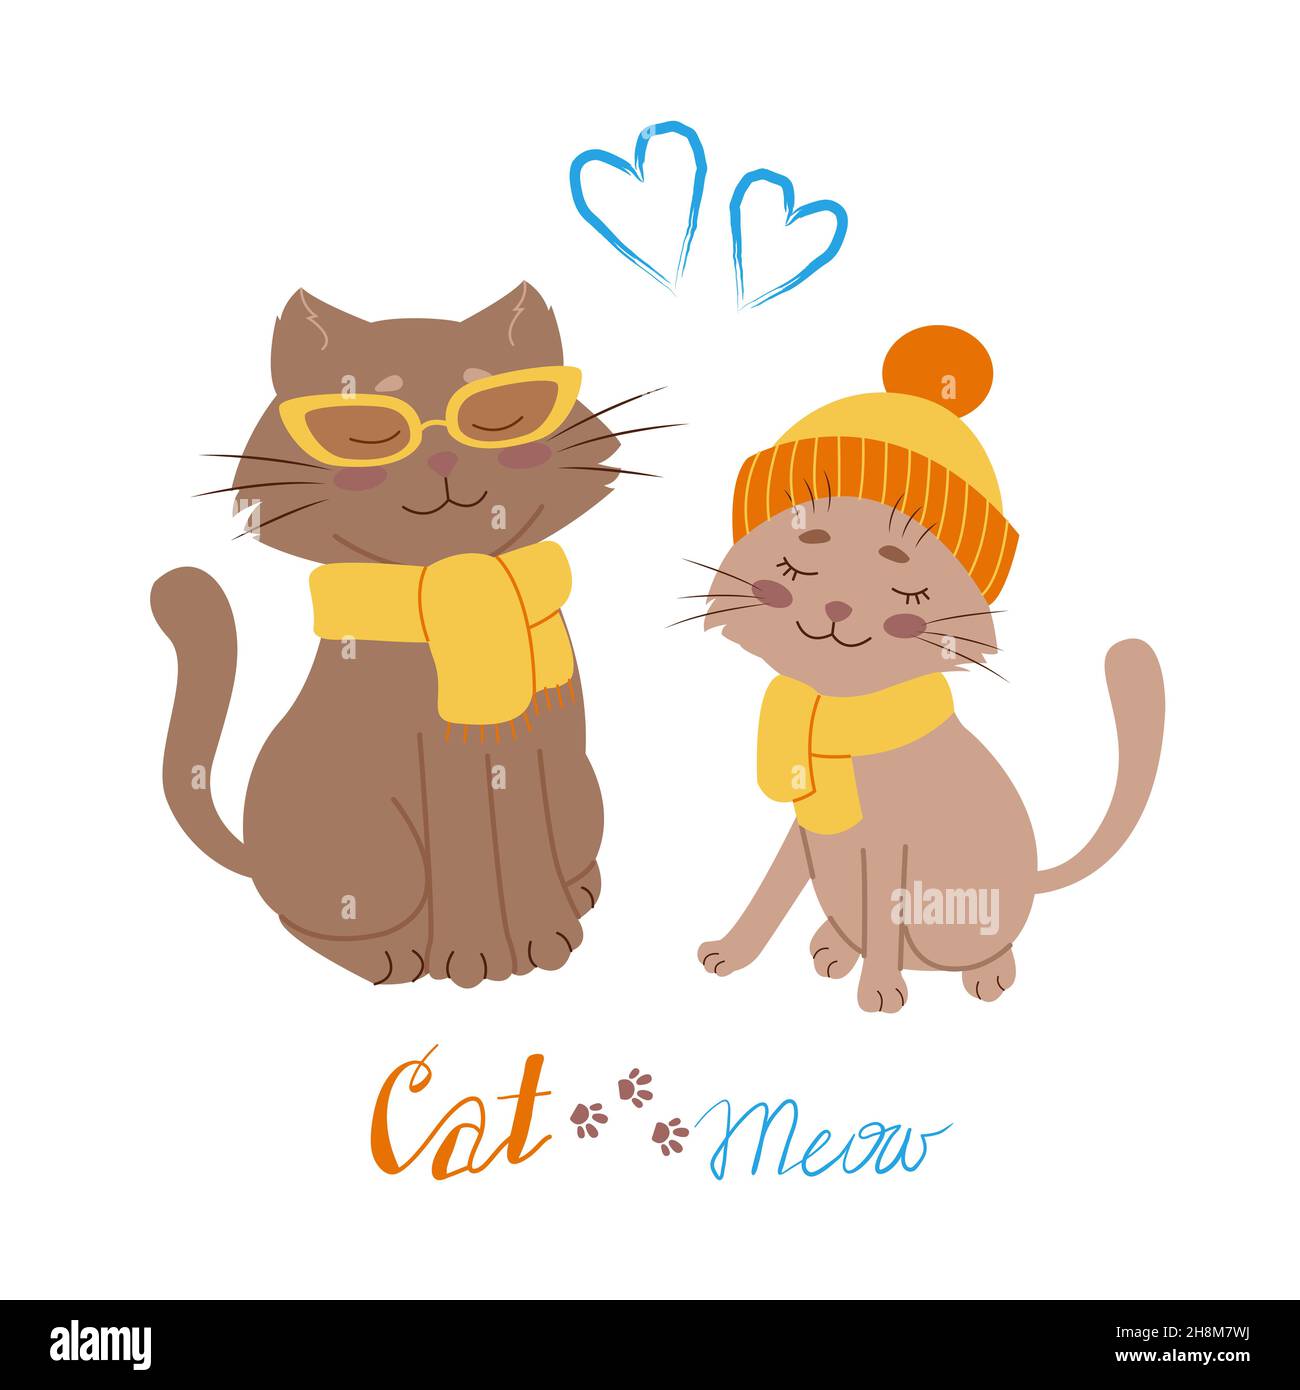 3,000+ Two Cats Stock Illustrations, Royalty-Free Vector Graphics